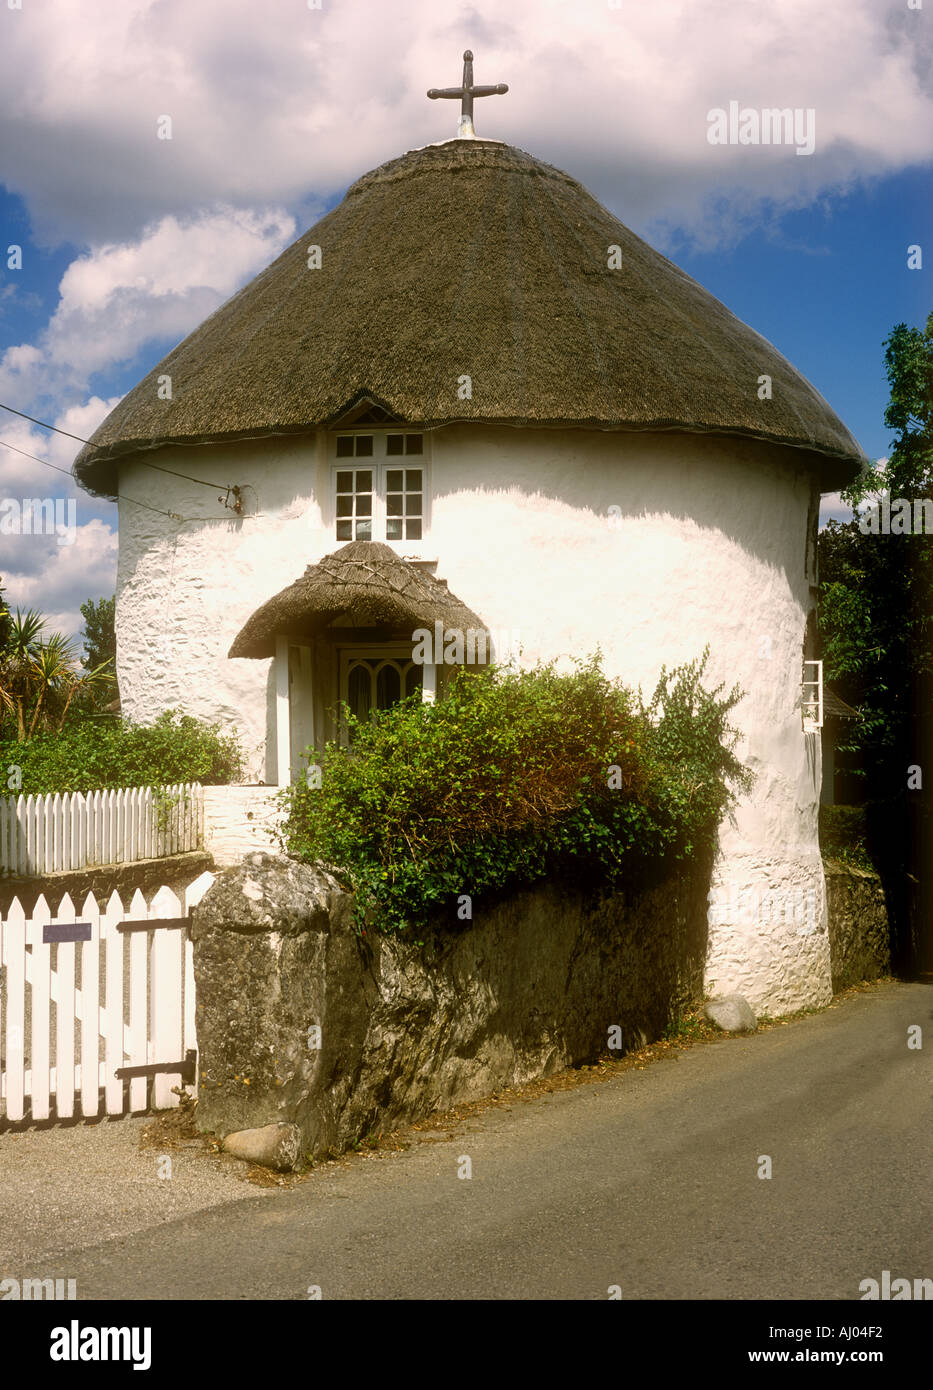 One of the famous thatched round houses in the village of Veryan on the Roseland Peninsula in Cornwall in the UK Stock Photo